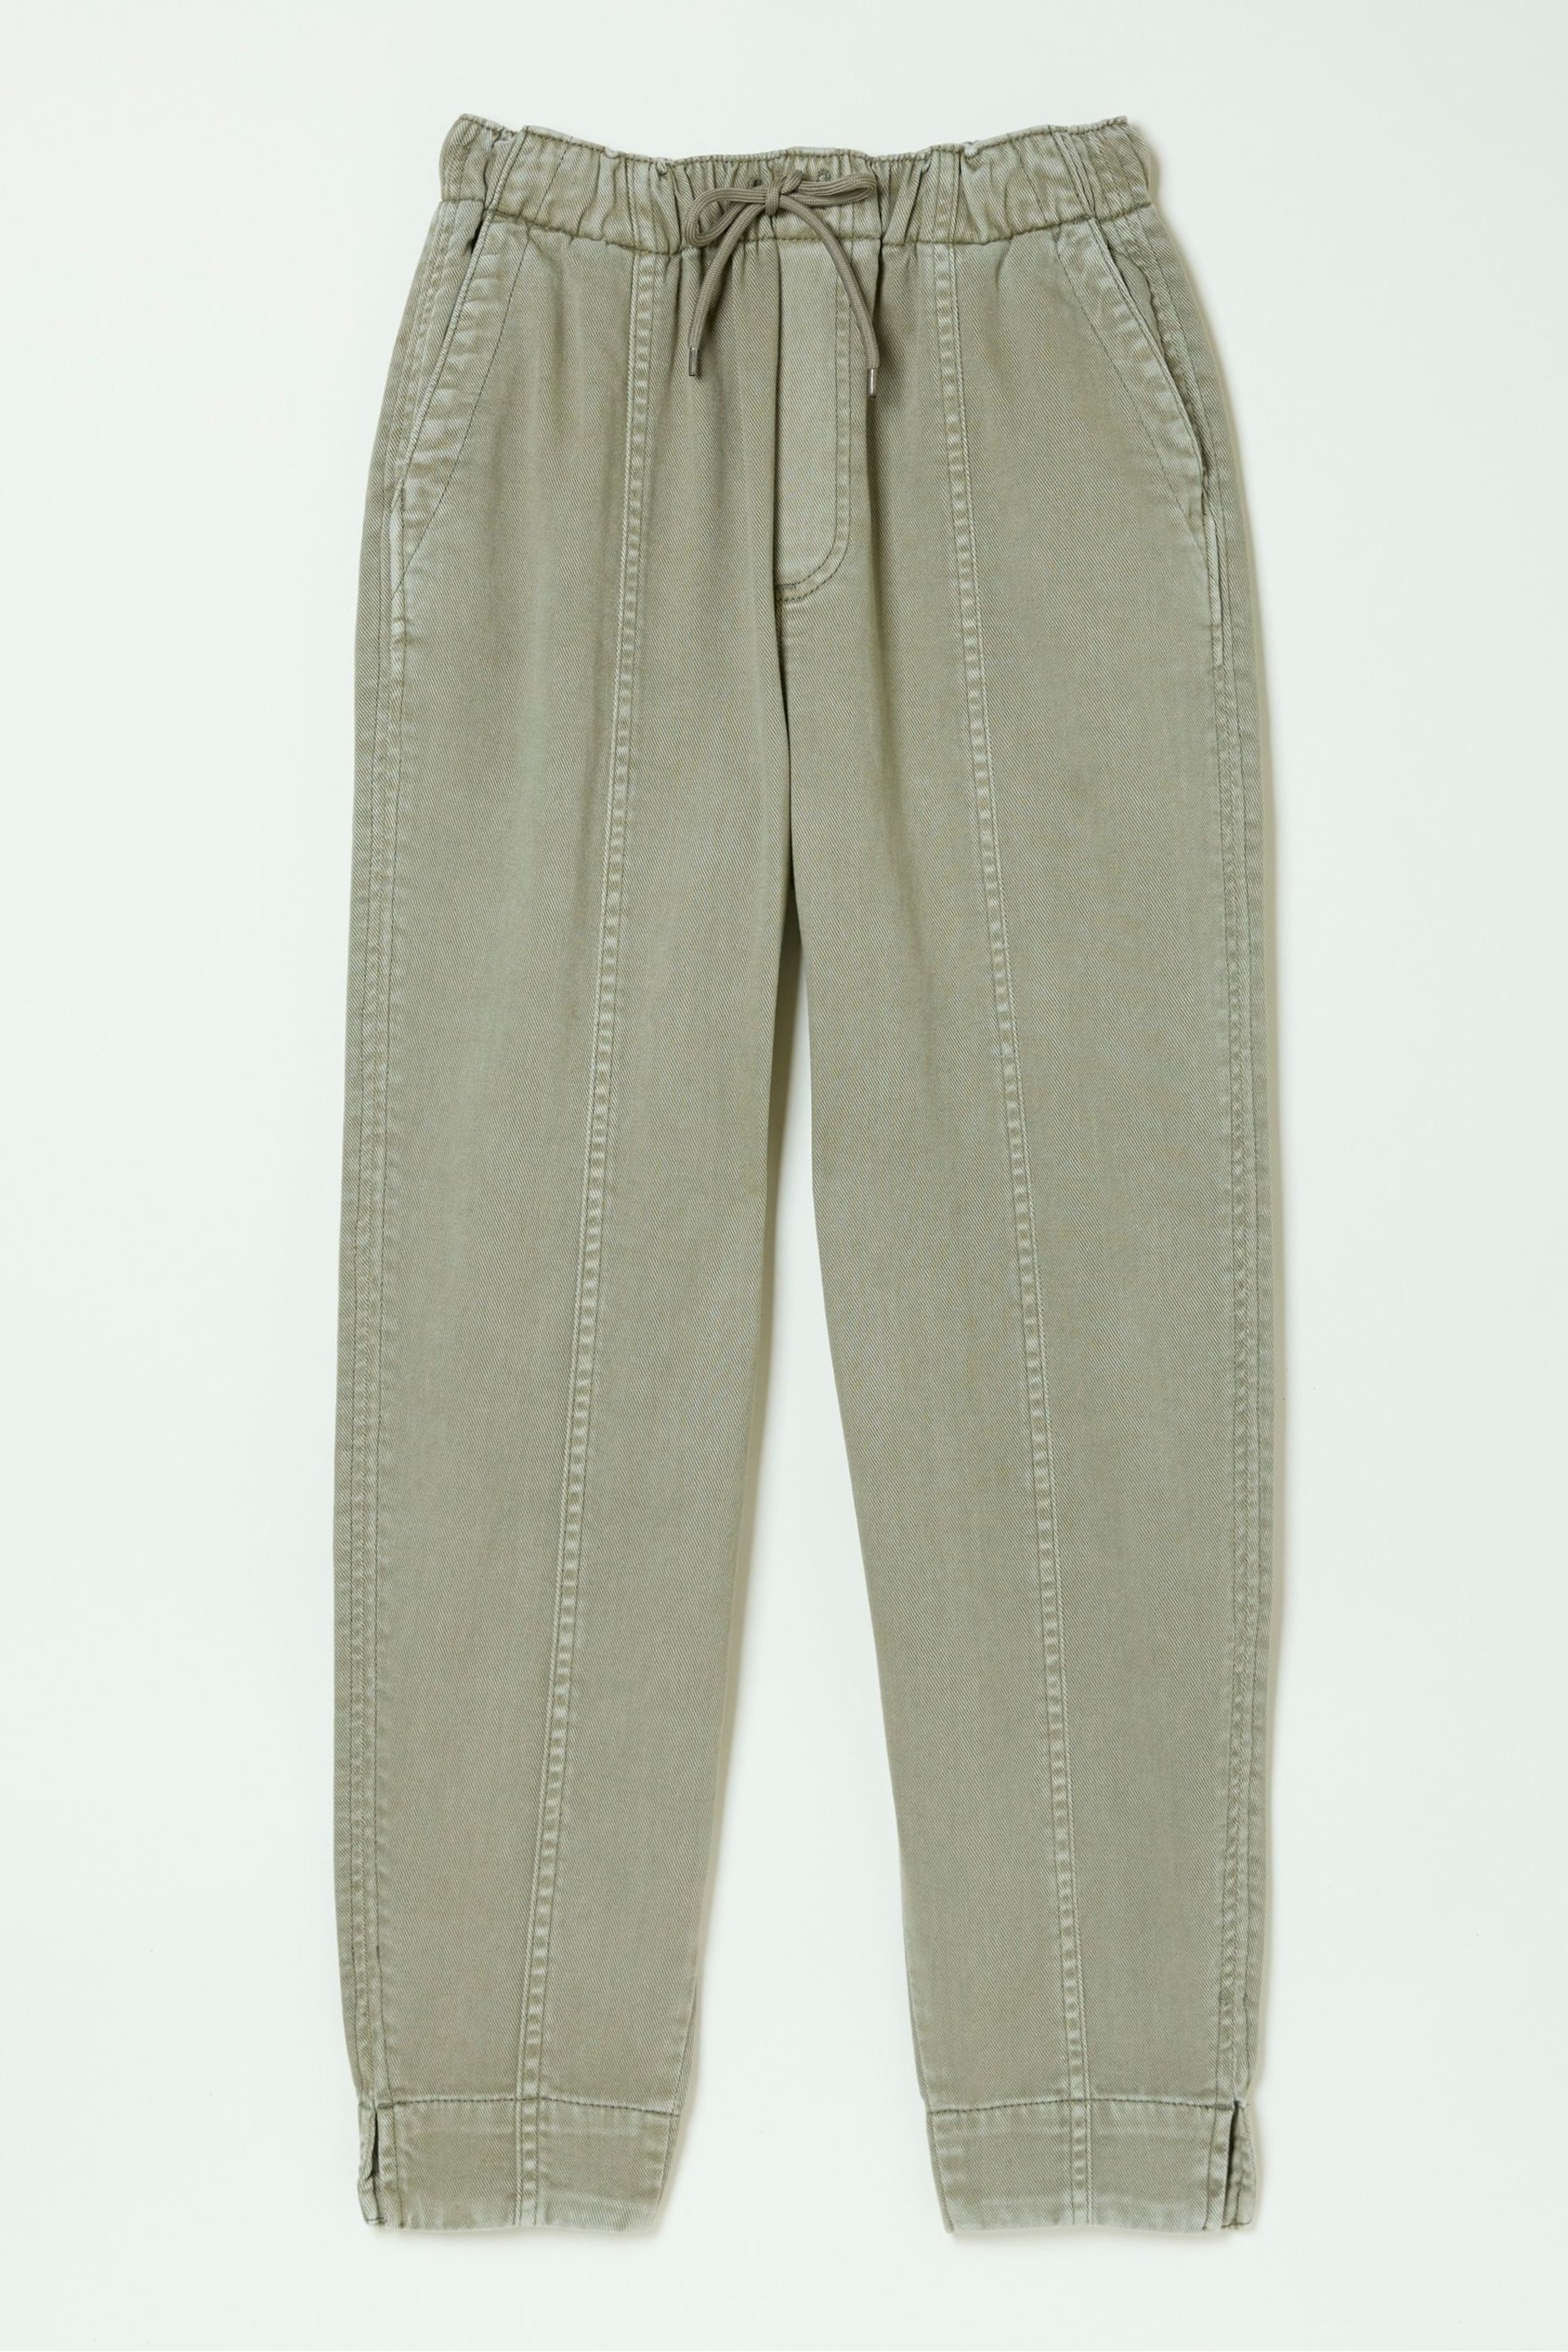 FatFace Green Ashli Tapered Cargo Trousers - Image 5 of 5